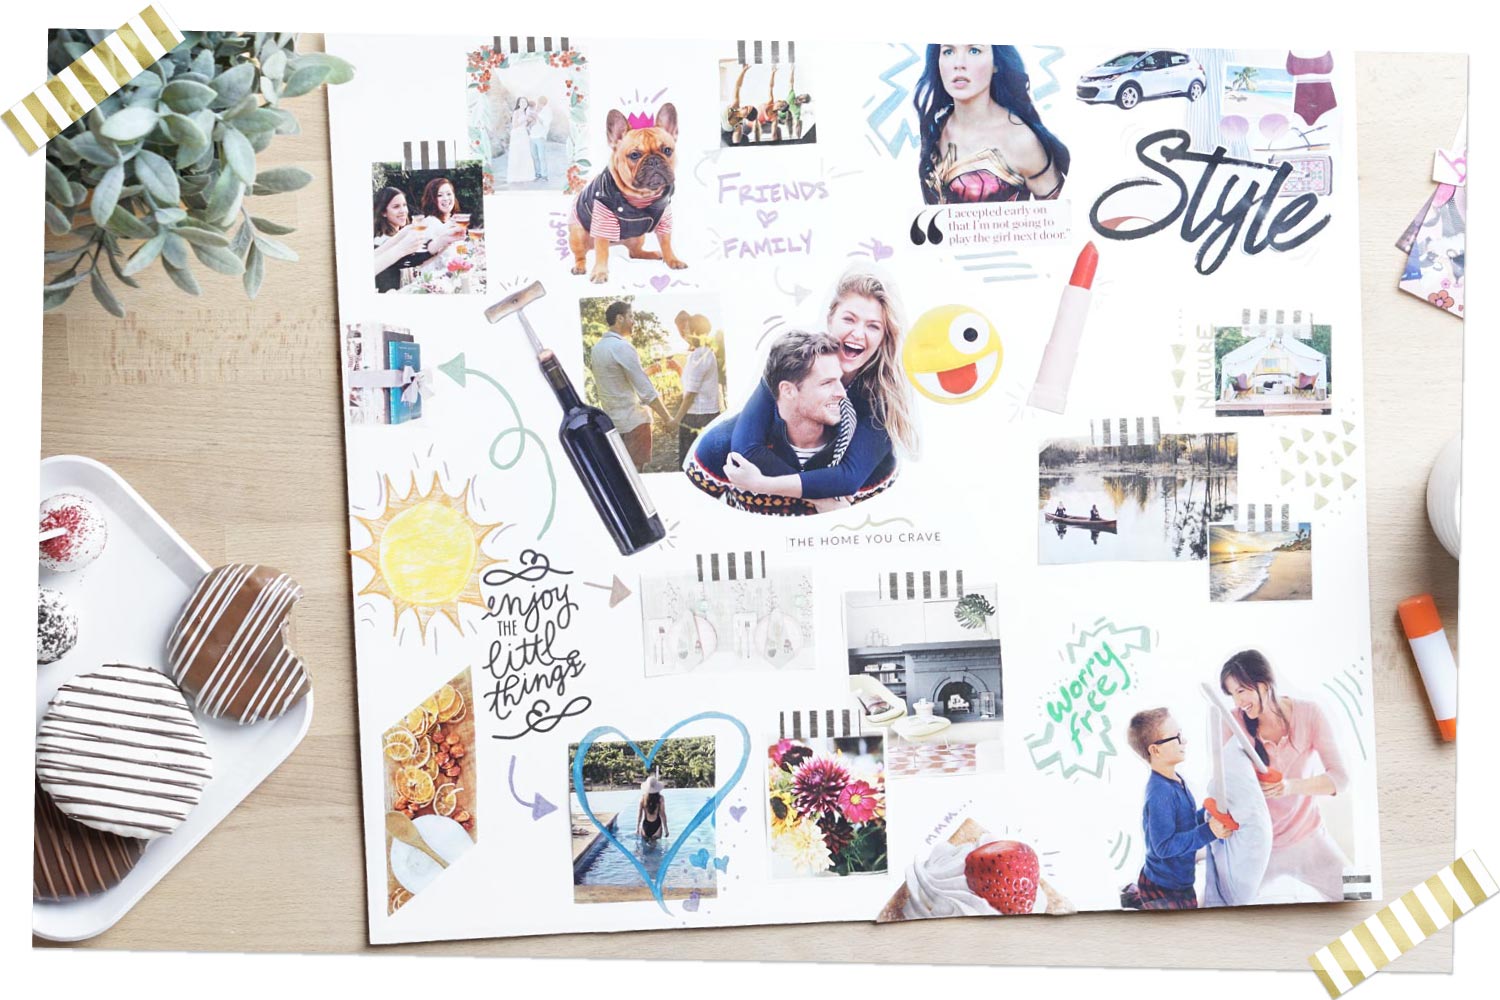 Set Goals for Yourself with Vision Board